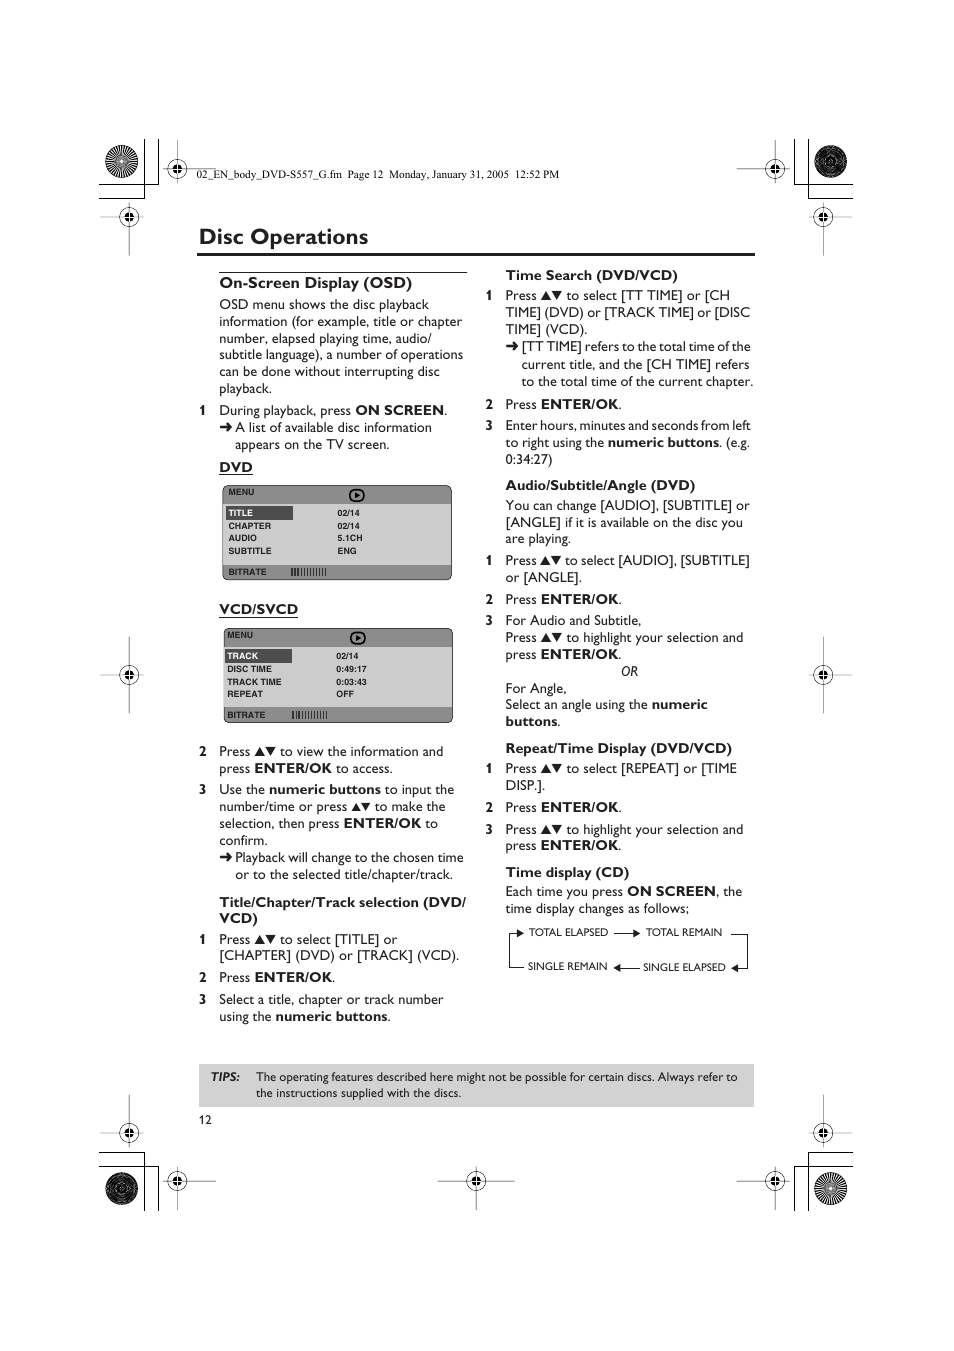 Disc operations, On-screen display (osd) | Yamaha DVD-S557 User Manual | Page 14 / 33